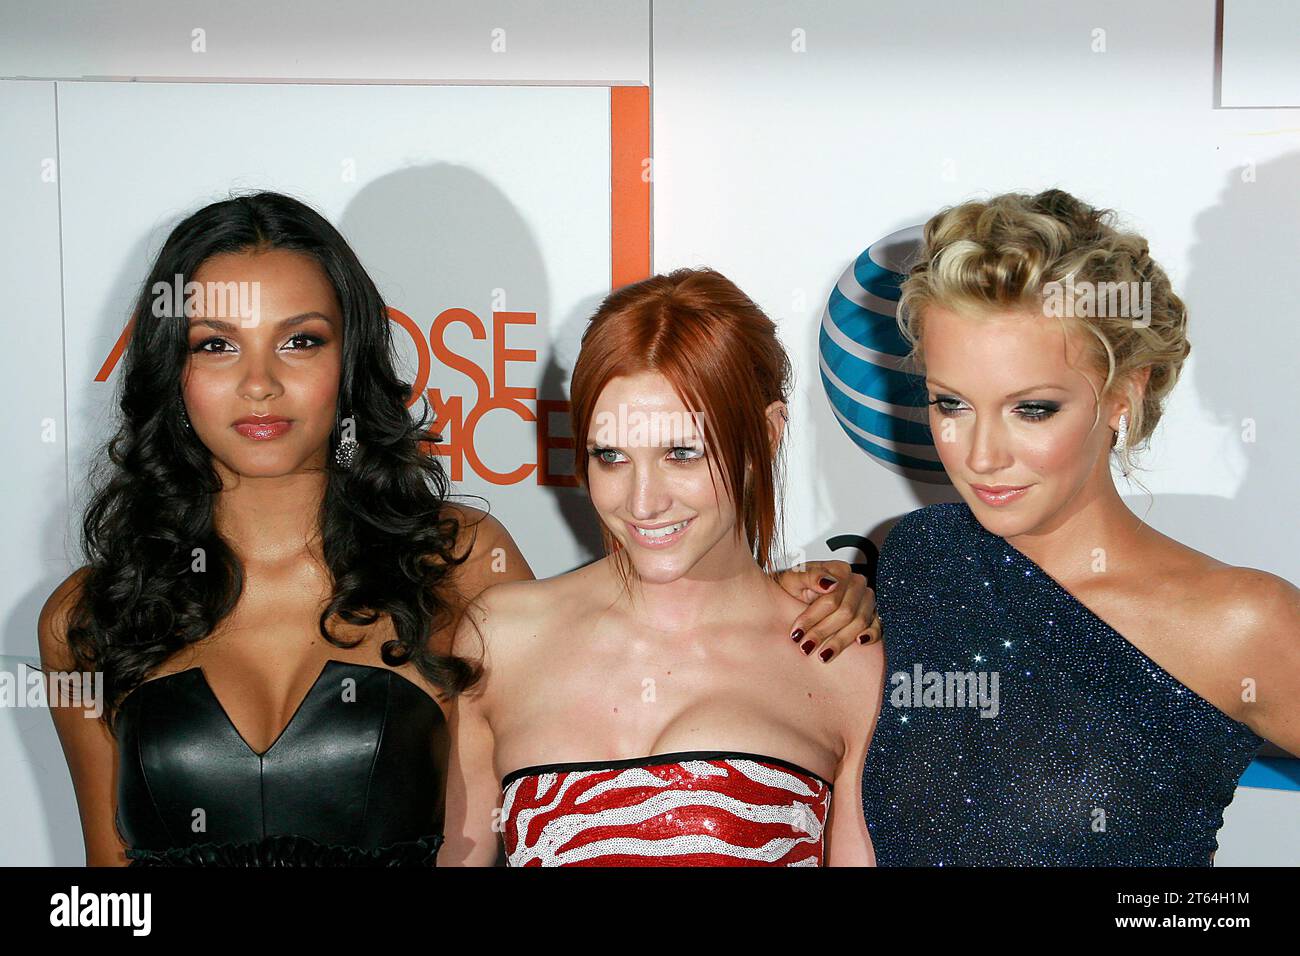 Jessica Lucas, Ashlee Simpson Wentz and Katie Cassidy at the CW and At&T's 'Melrose Place' Premiere Party - Arrivals held at the corner of Melrose Place and Melrose Avenue in West Hollywood, CA August 22, 2009. Photo Credit: Joseph Martinez / Picturelux Stock Photo